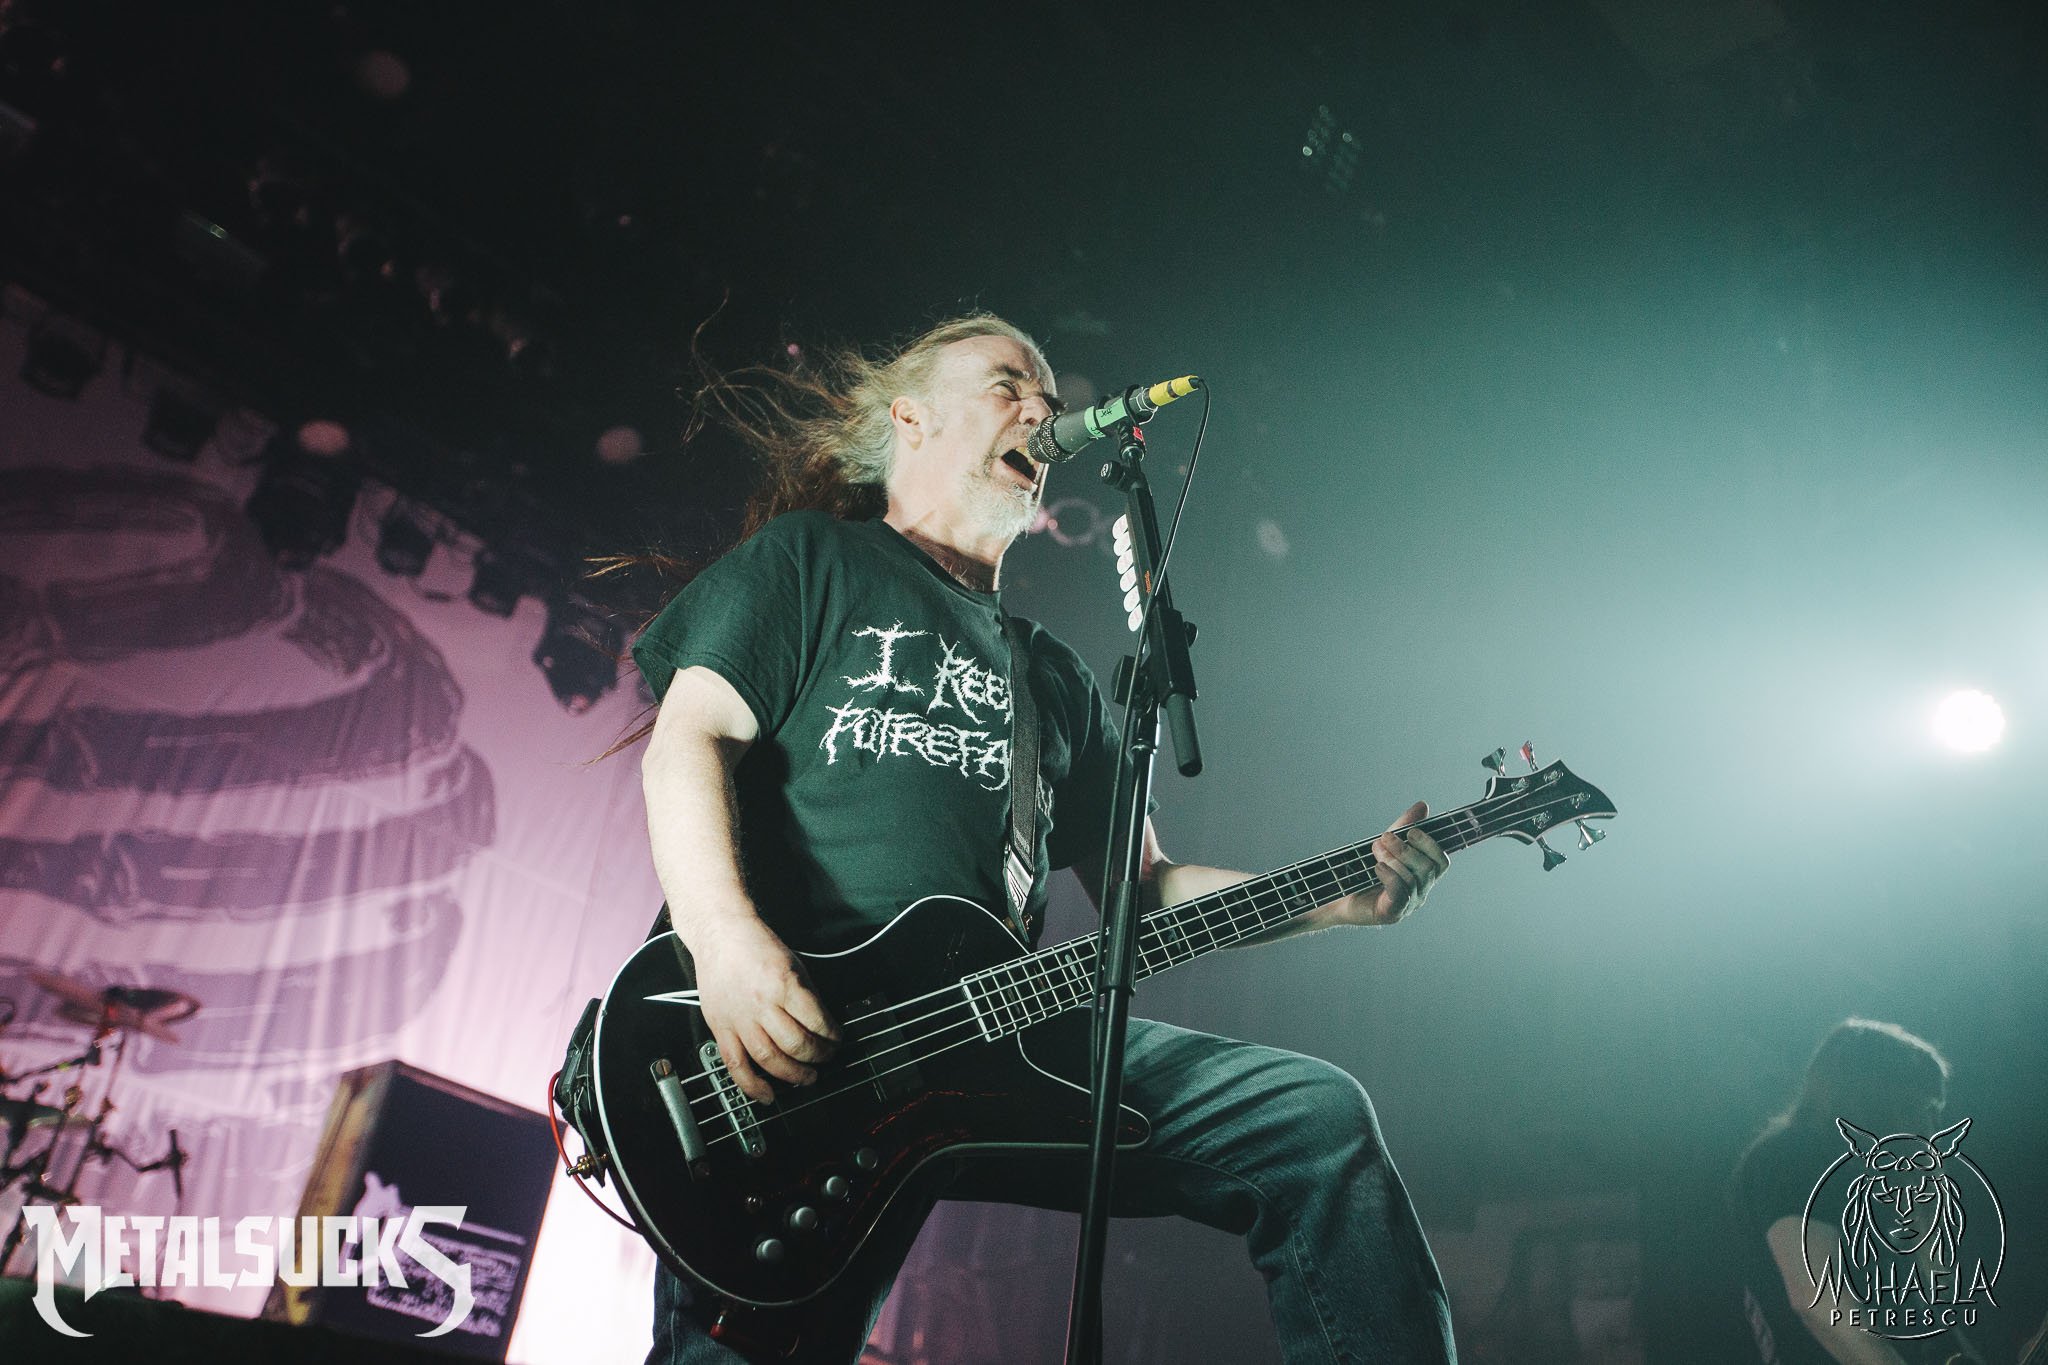 Carcass is Replacing At The Gates on This Year’s Headbanger’s Boat